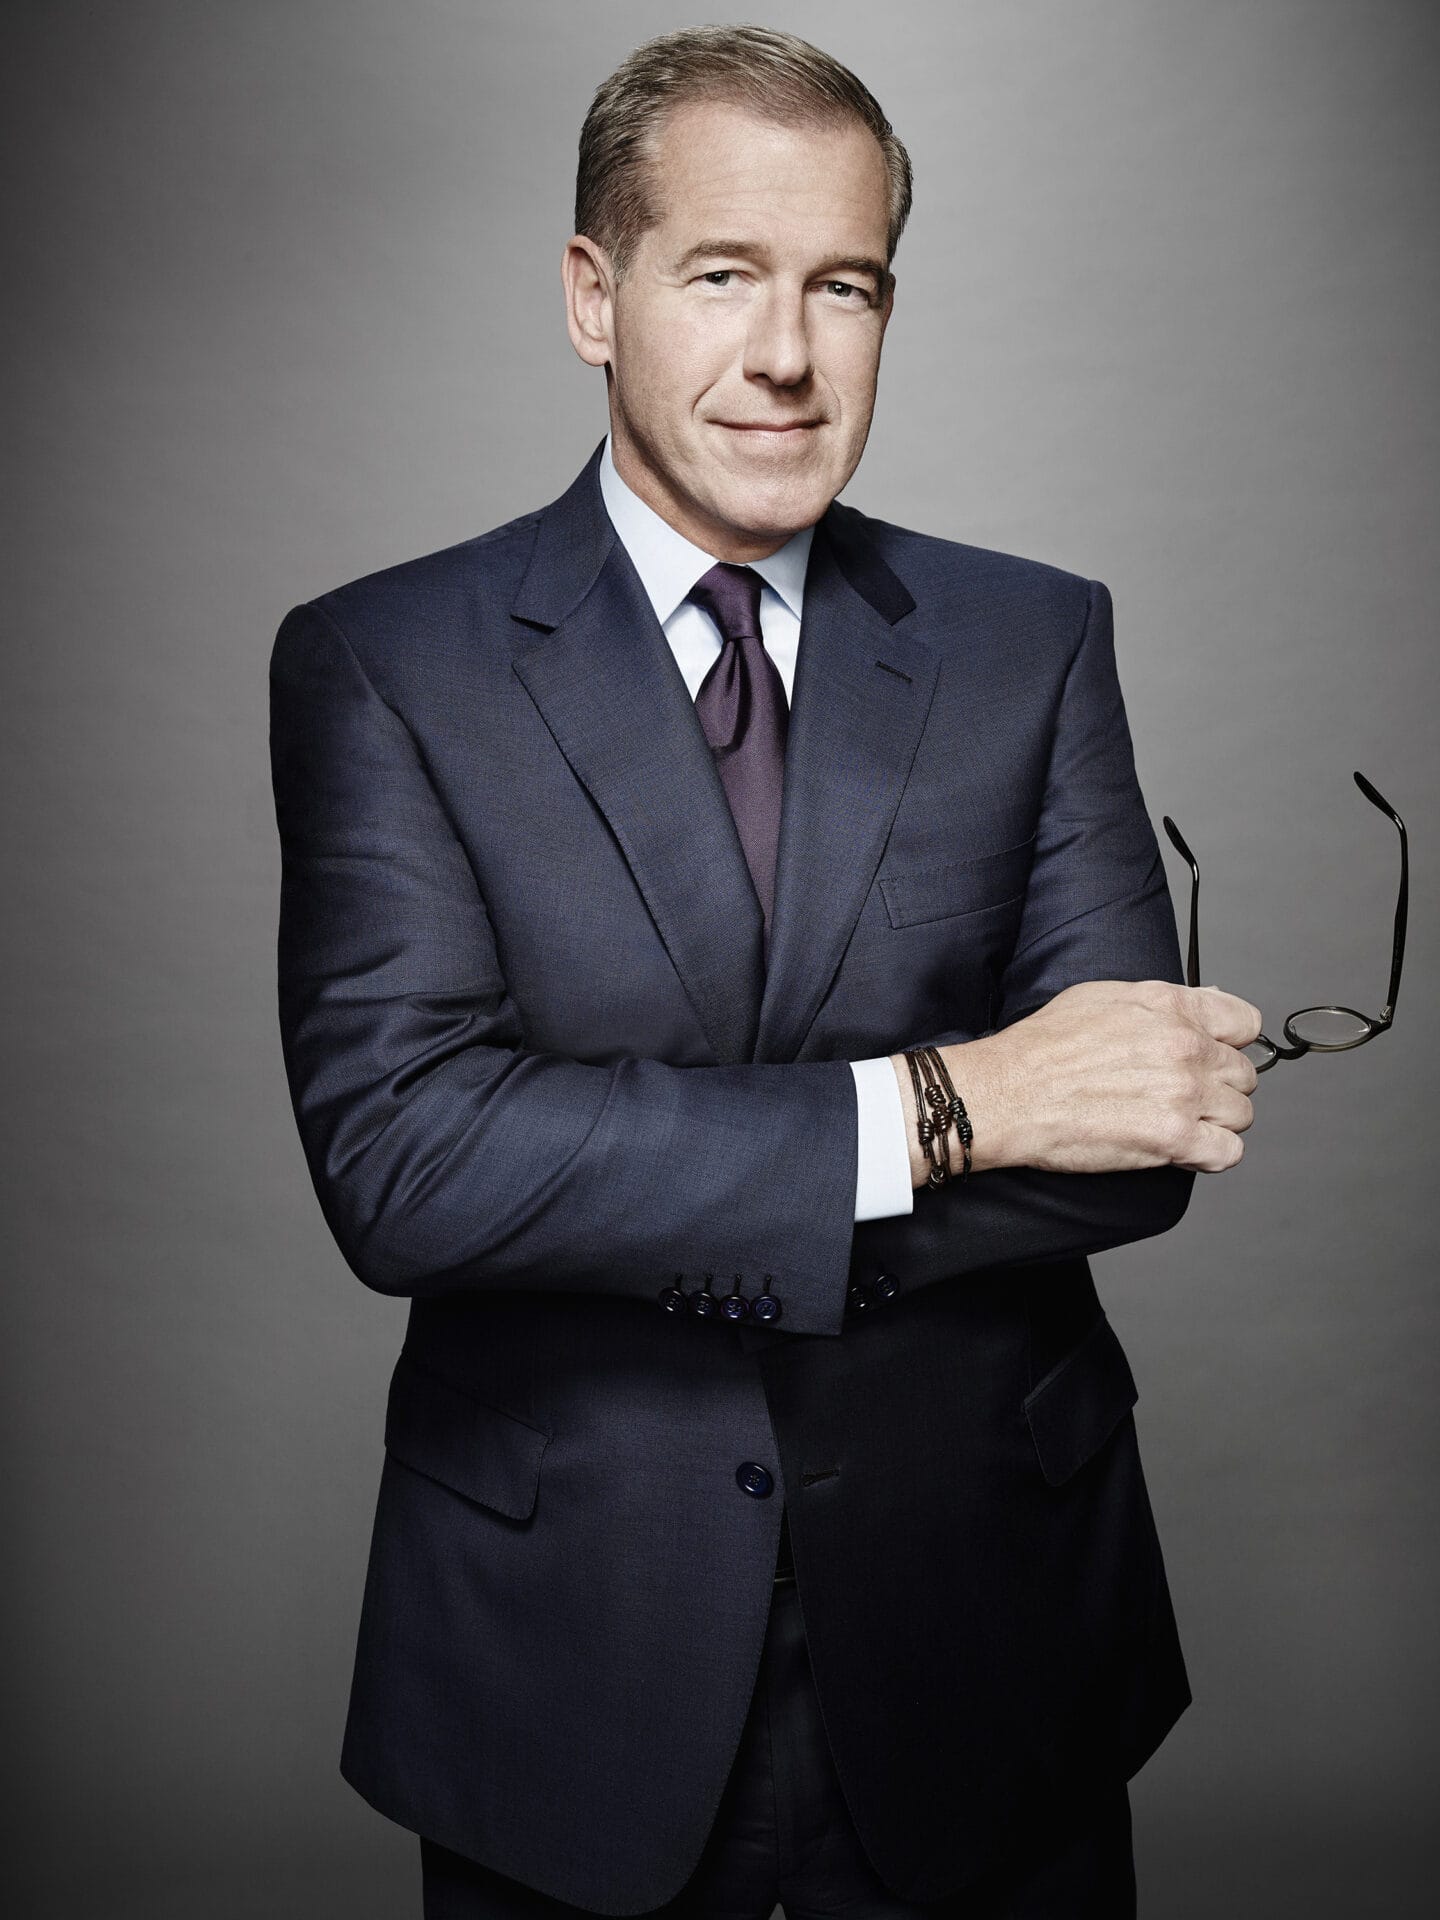 How rich is Brian Williams?